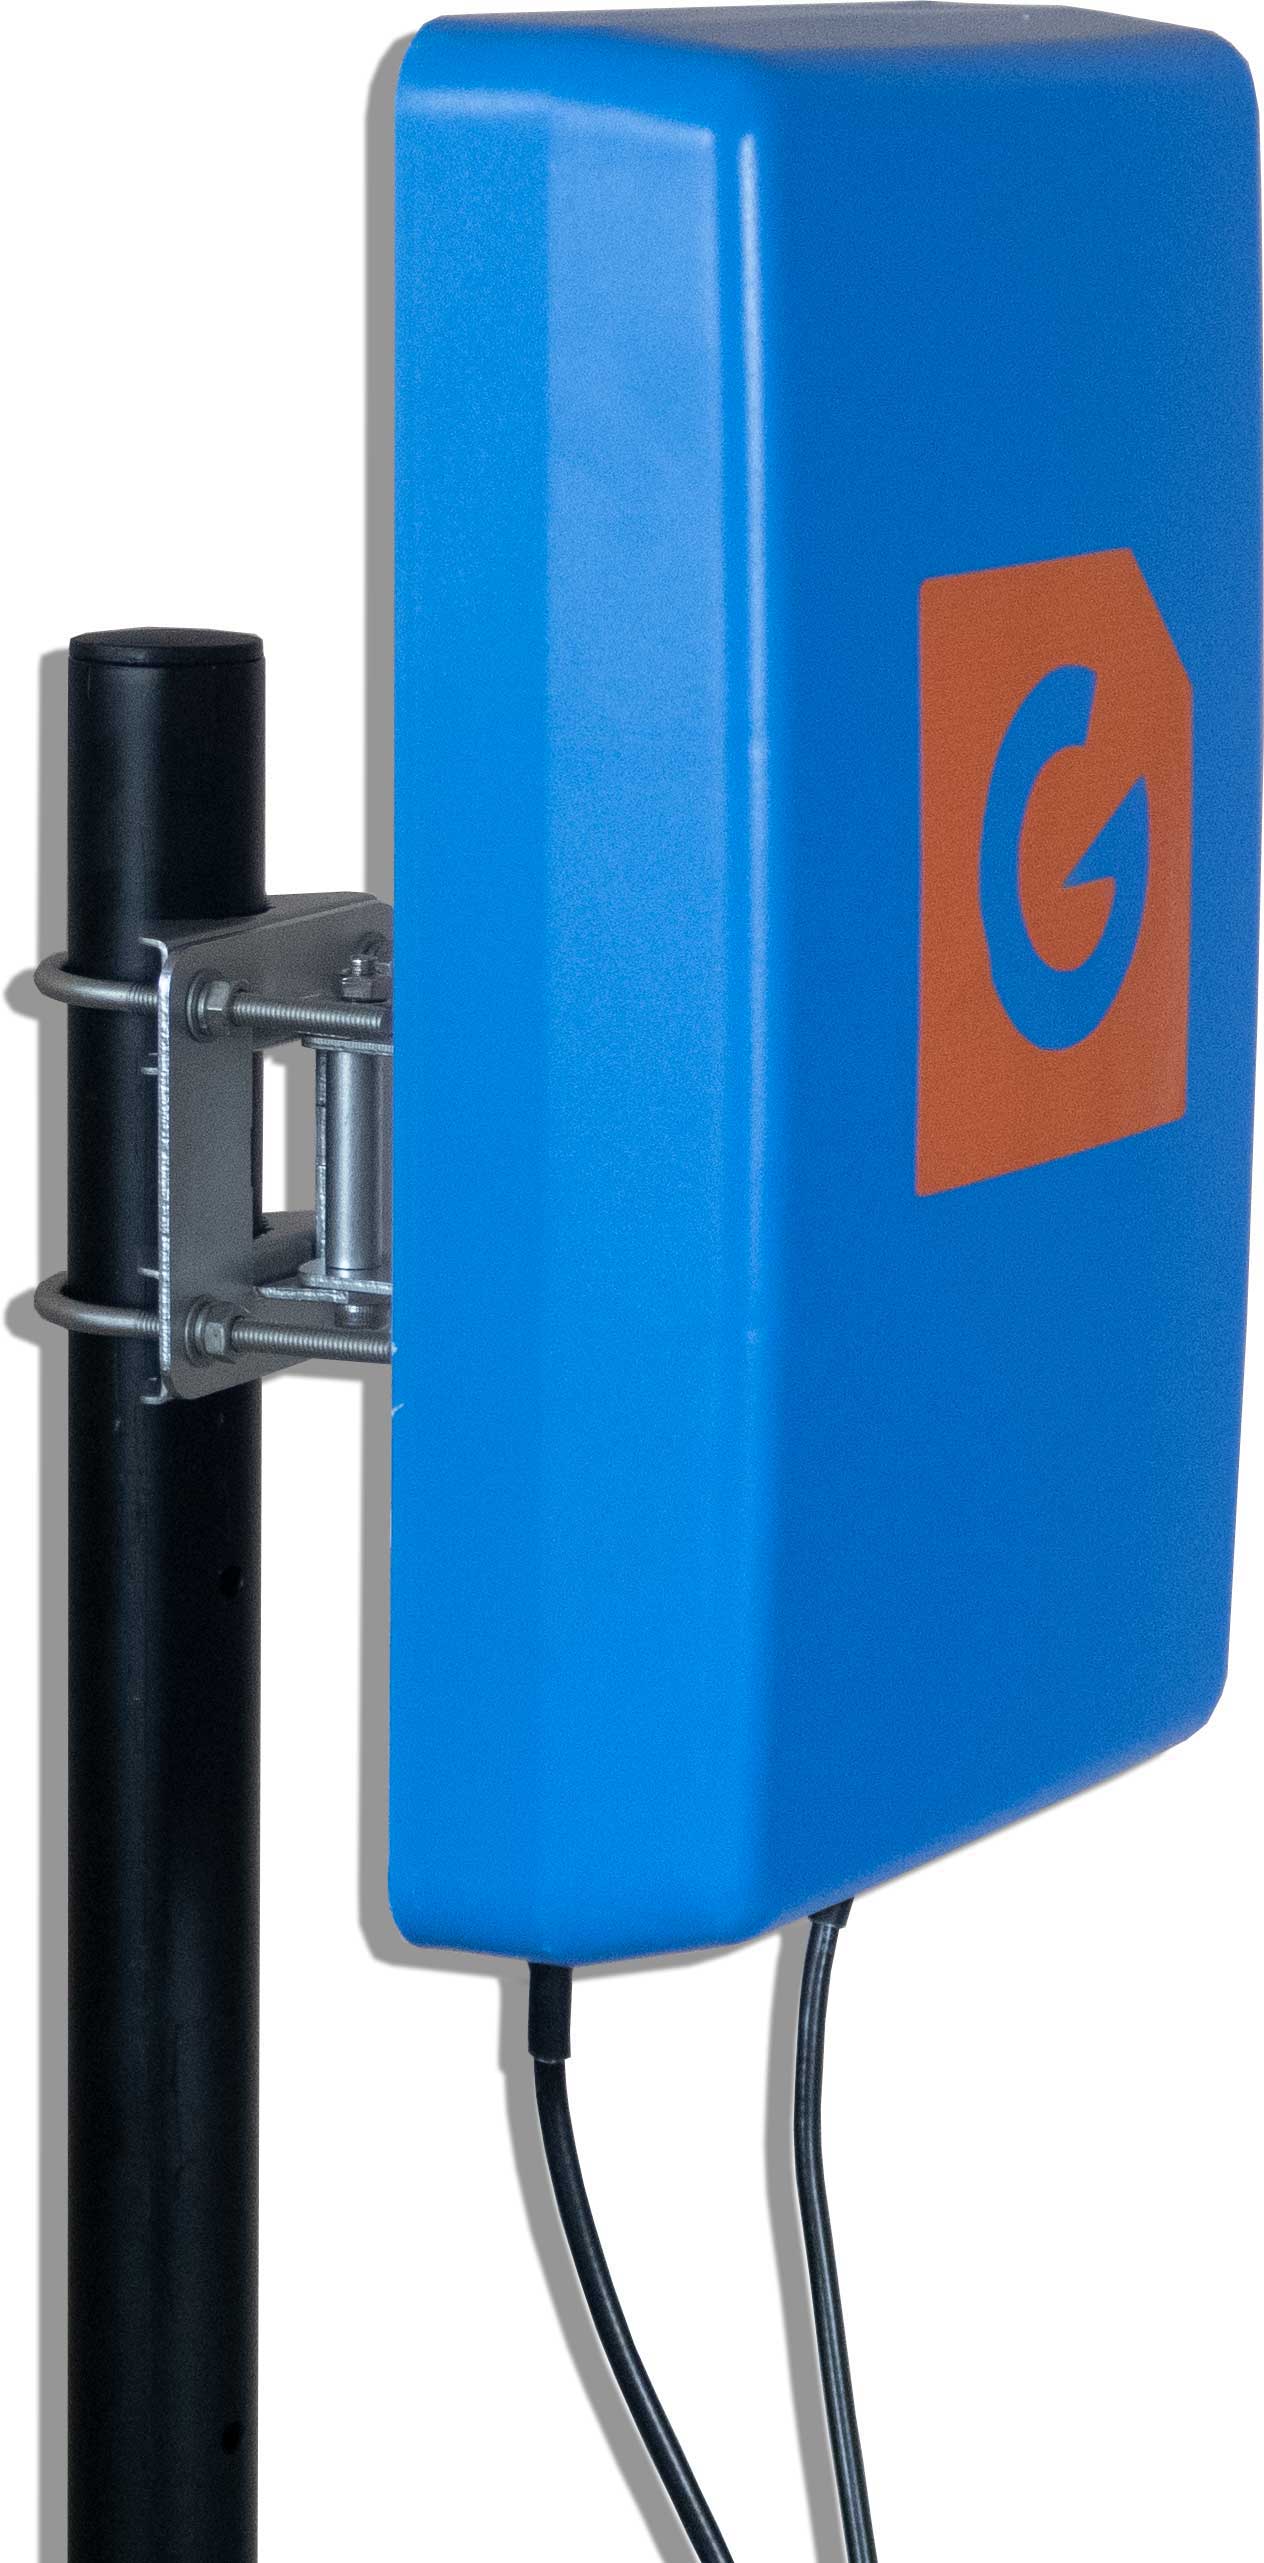 The G Spotter True Blue LTE MiMO antenna... Click Here for more details